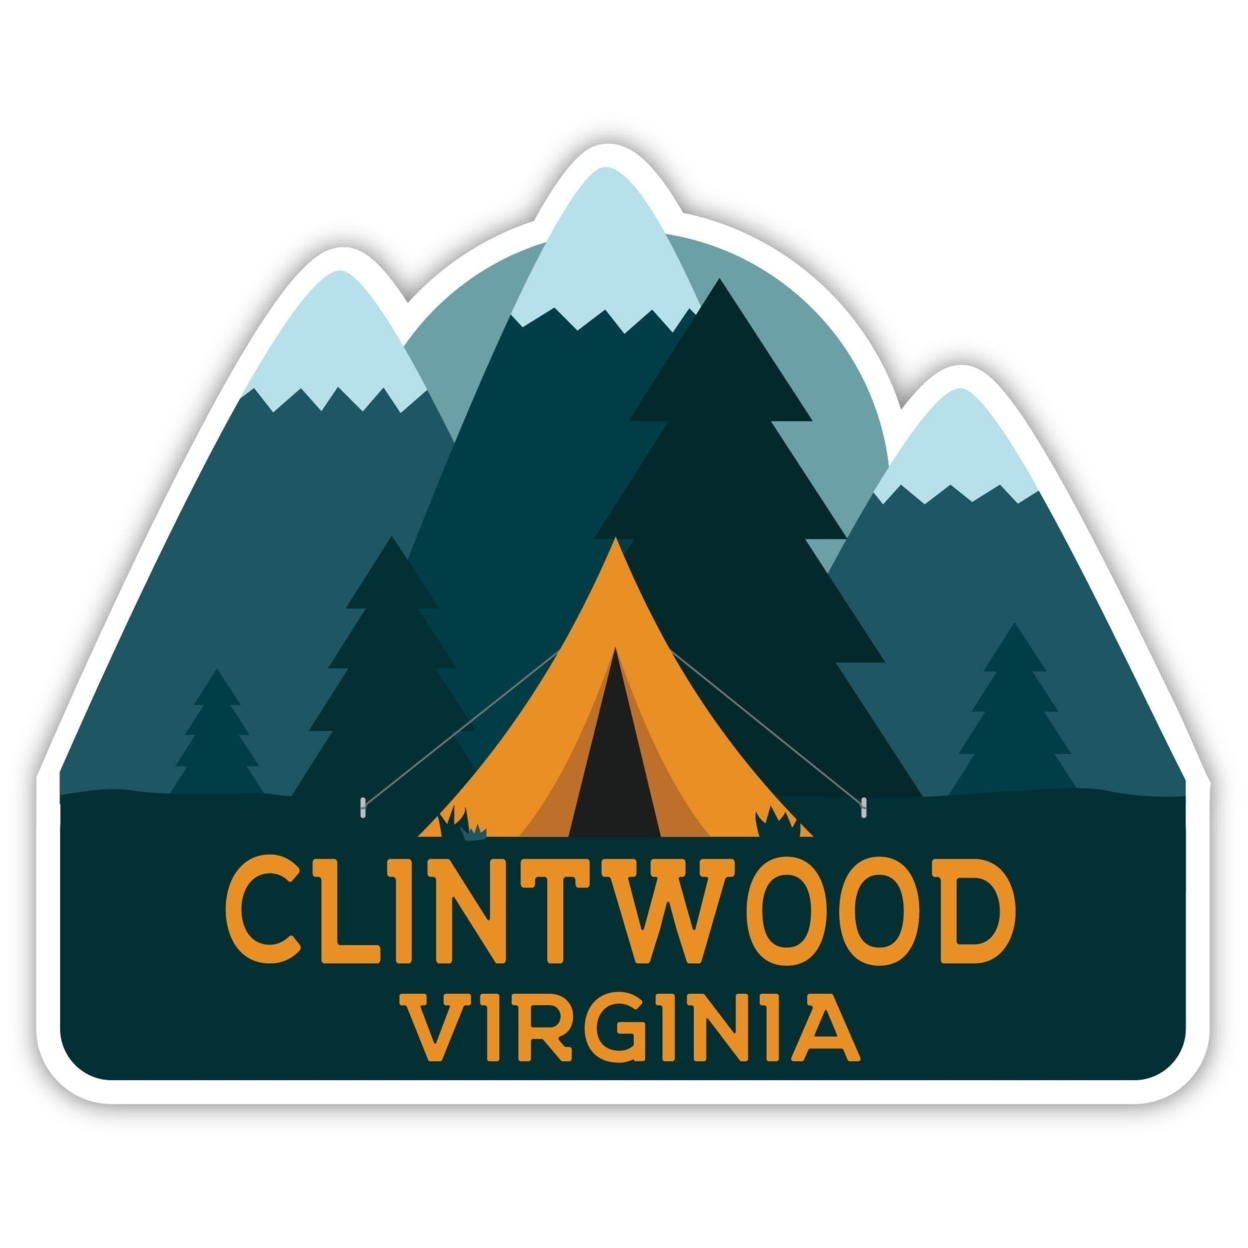 Clintwood Virginia Souvenir Decorative Stickers (Choose Theme And Size) - 4-Pack, 2-Inch, Tent